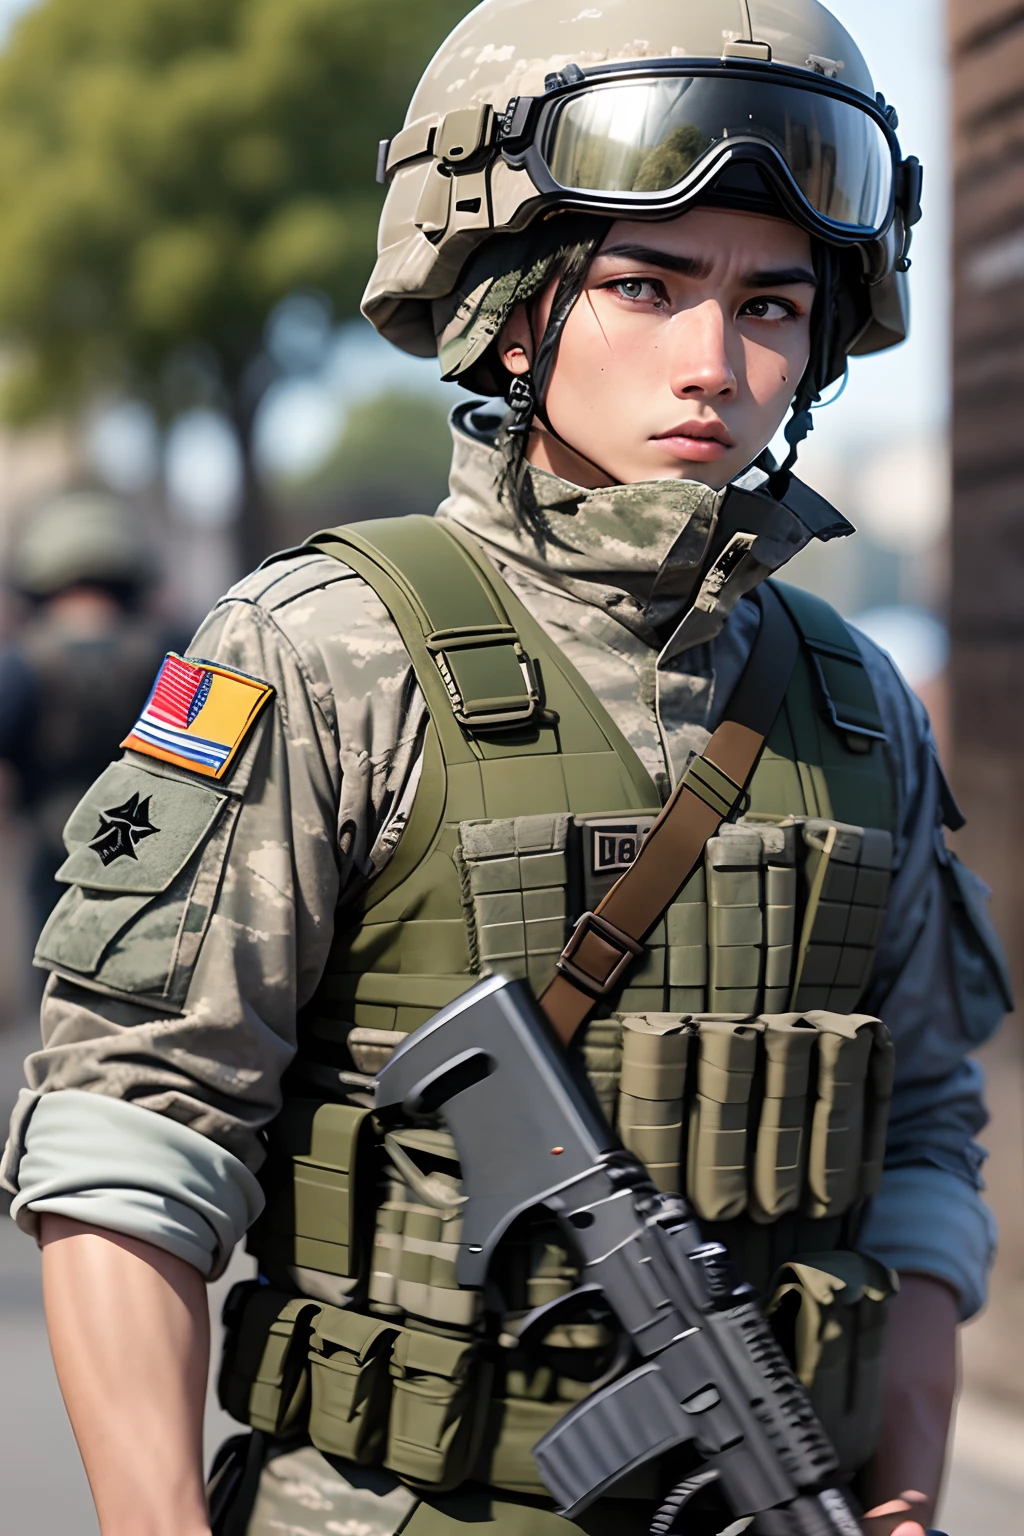 These soldiers are wearing uniform military attire, which reflects orderliness and discipline. They are also equipped with gear such as helmets, vests, and adequate weaponry.